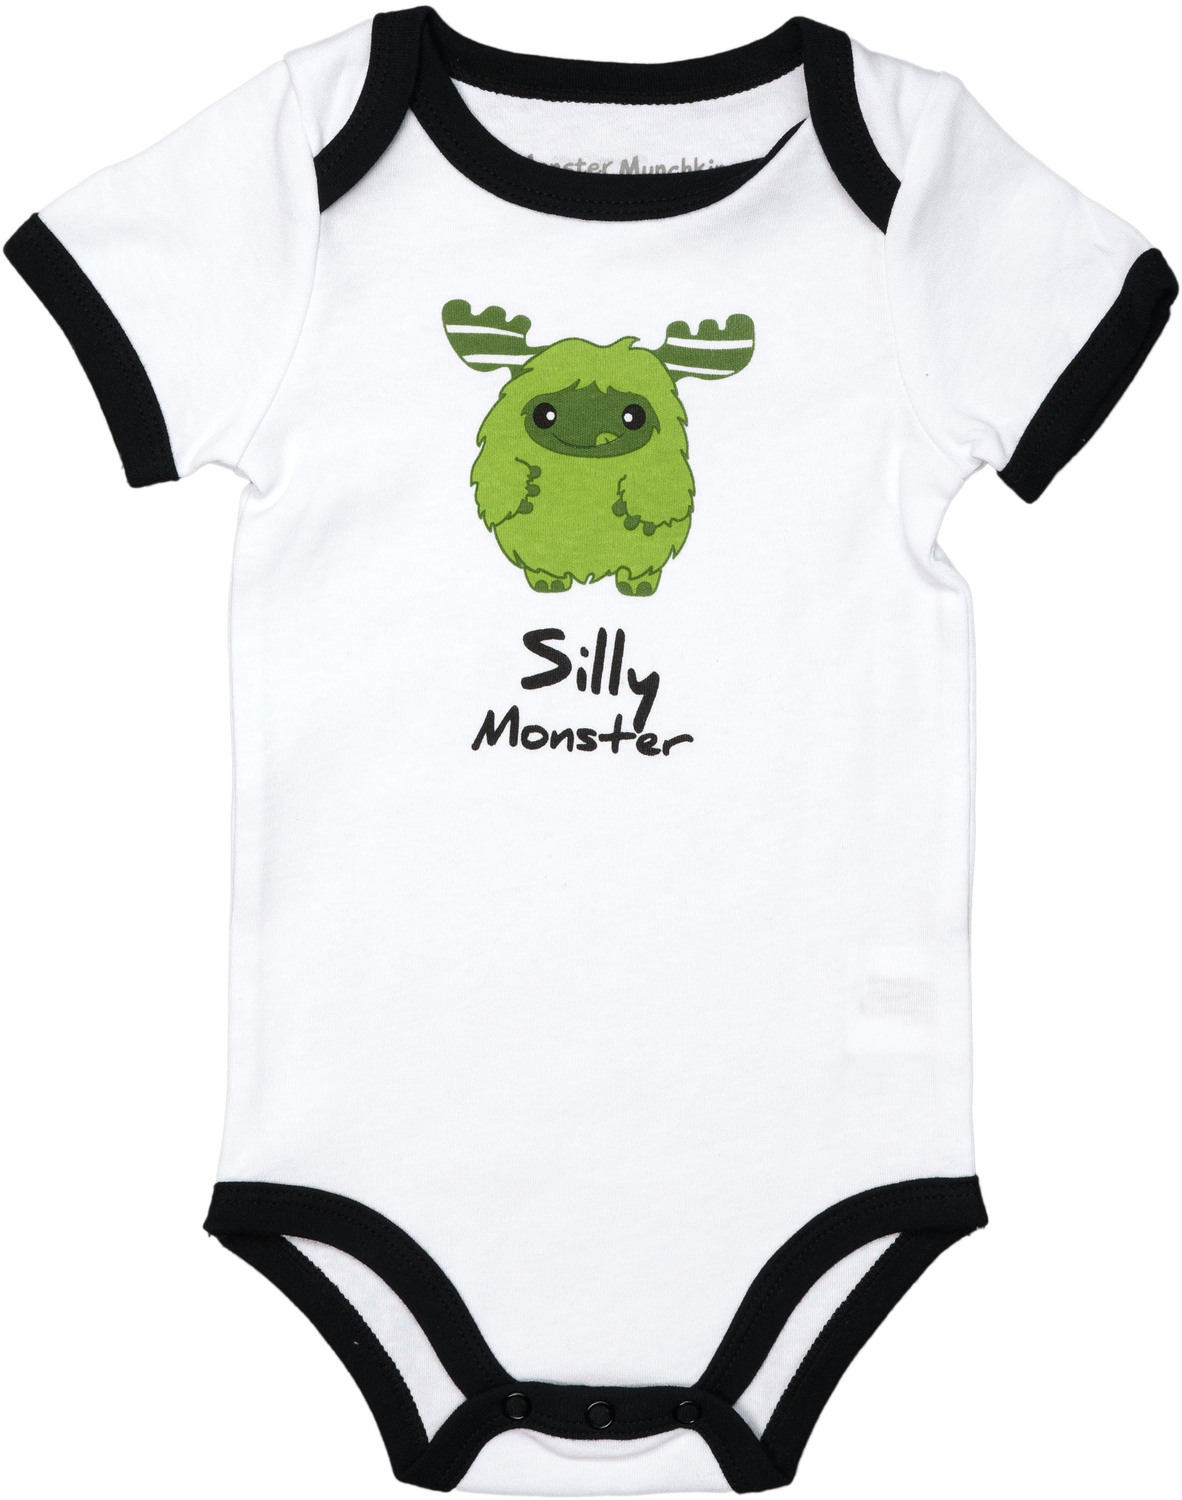 Green Silly Monster by Monster Munchkins - Green Silly Monster - 6-12 Months
Bodysuit